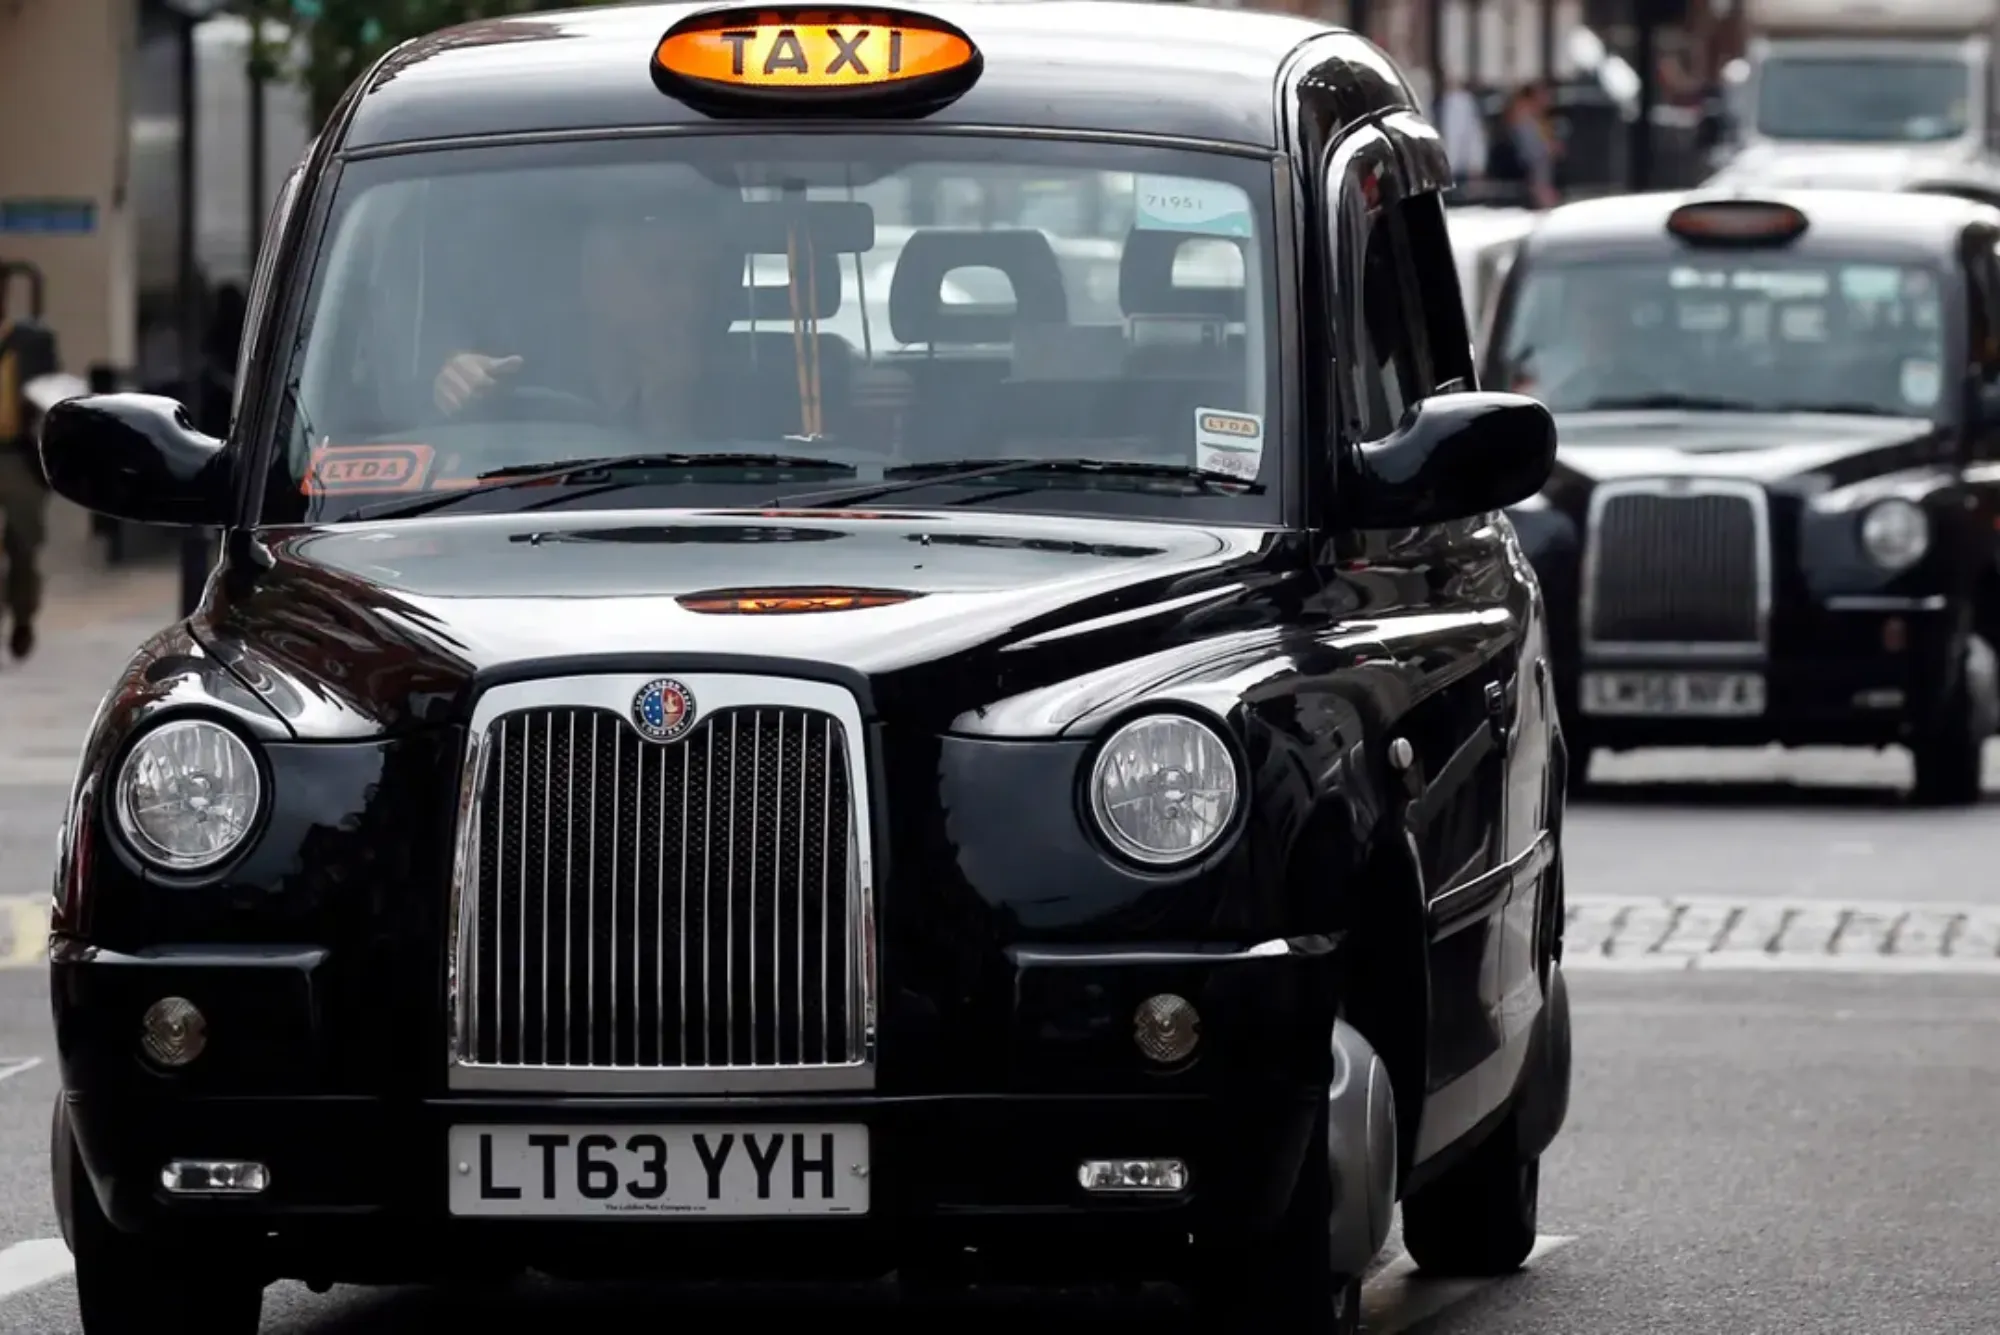 How To Get A Cab In London